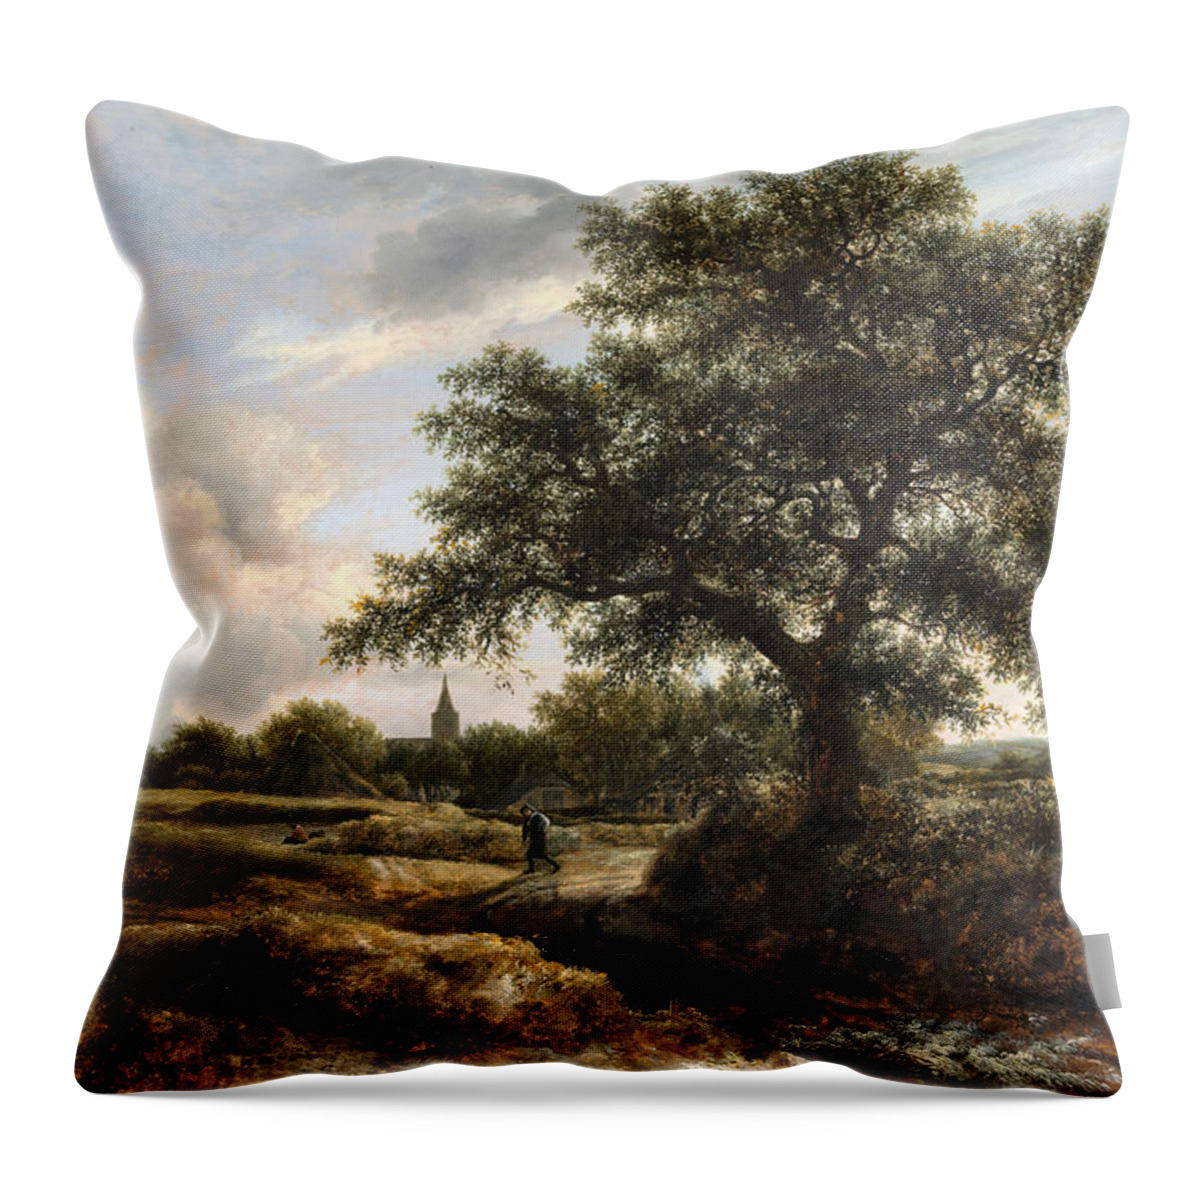 Hills Throw Pillow featuring the painting Landscape with a Village in the Distance by Jacob van Ruisdael